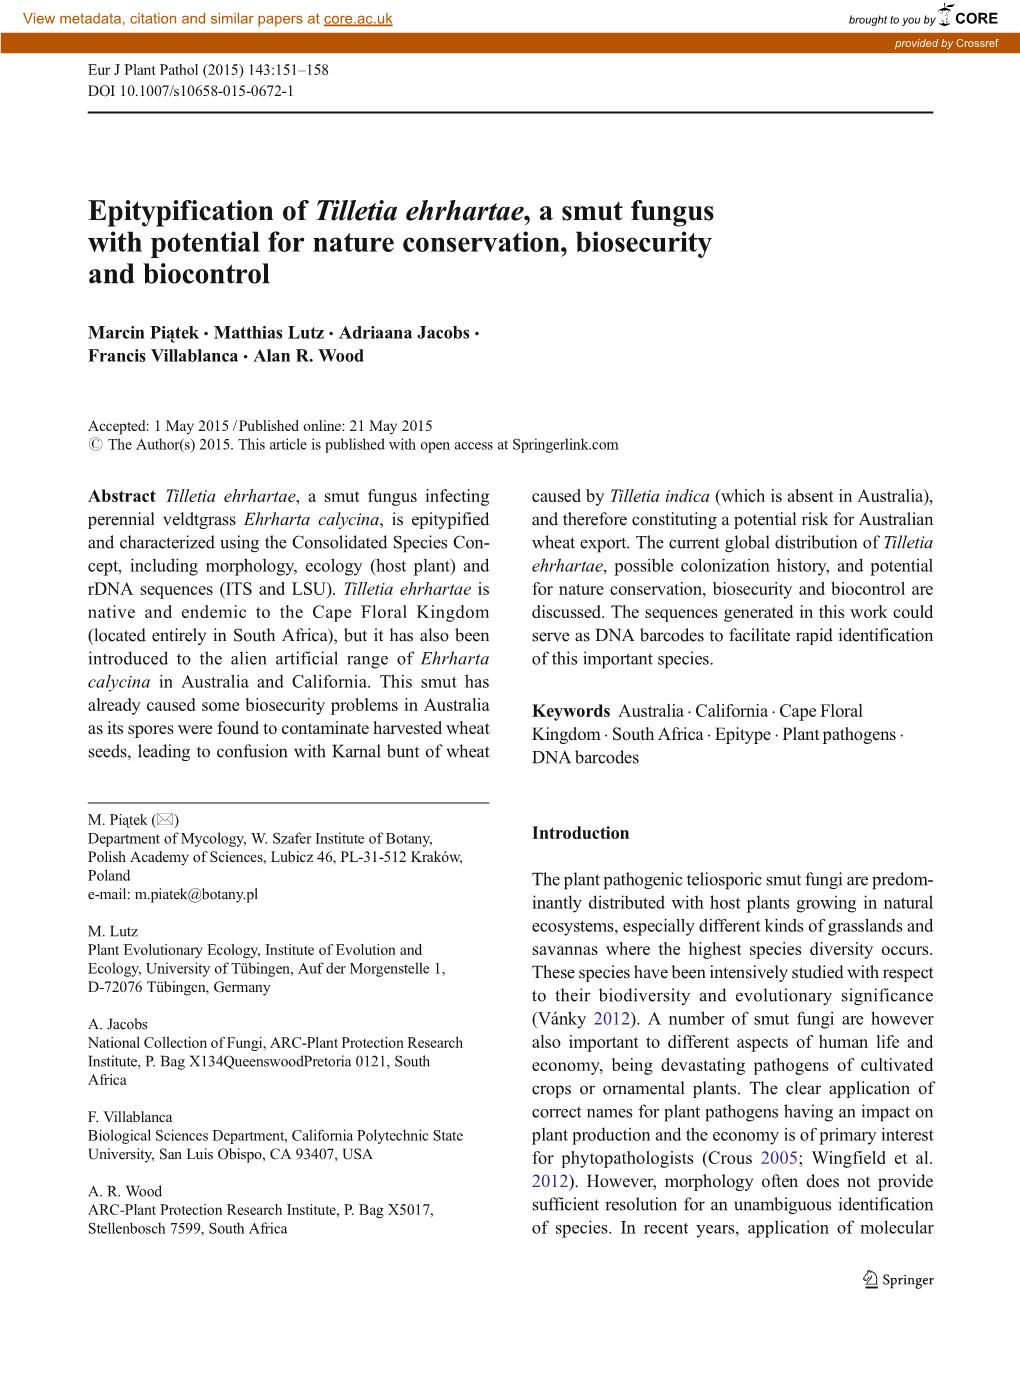 Epitypification of Tilletia Ehrhartae, a Smut Fungus with Potential For